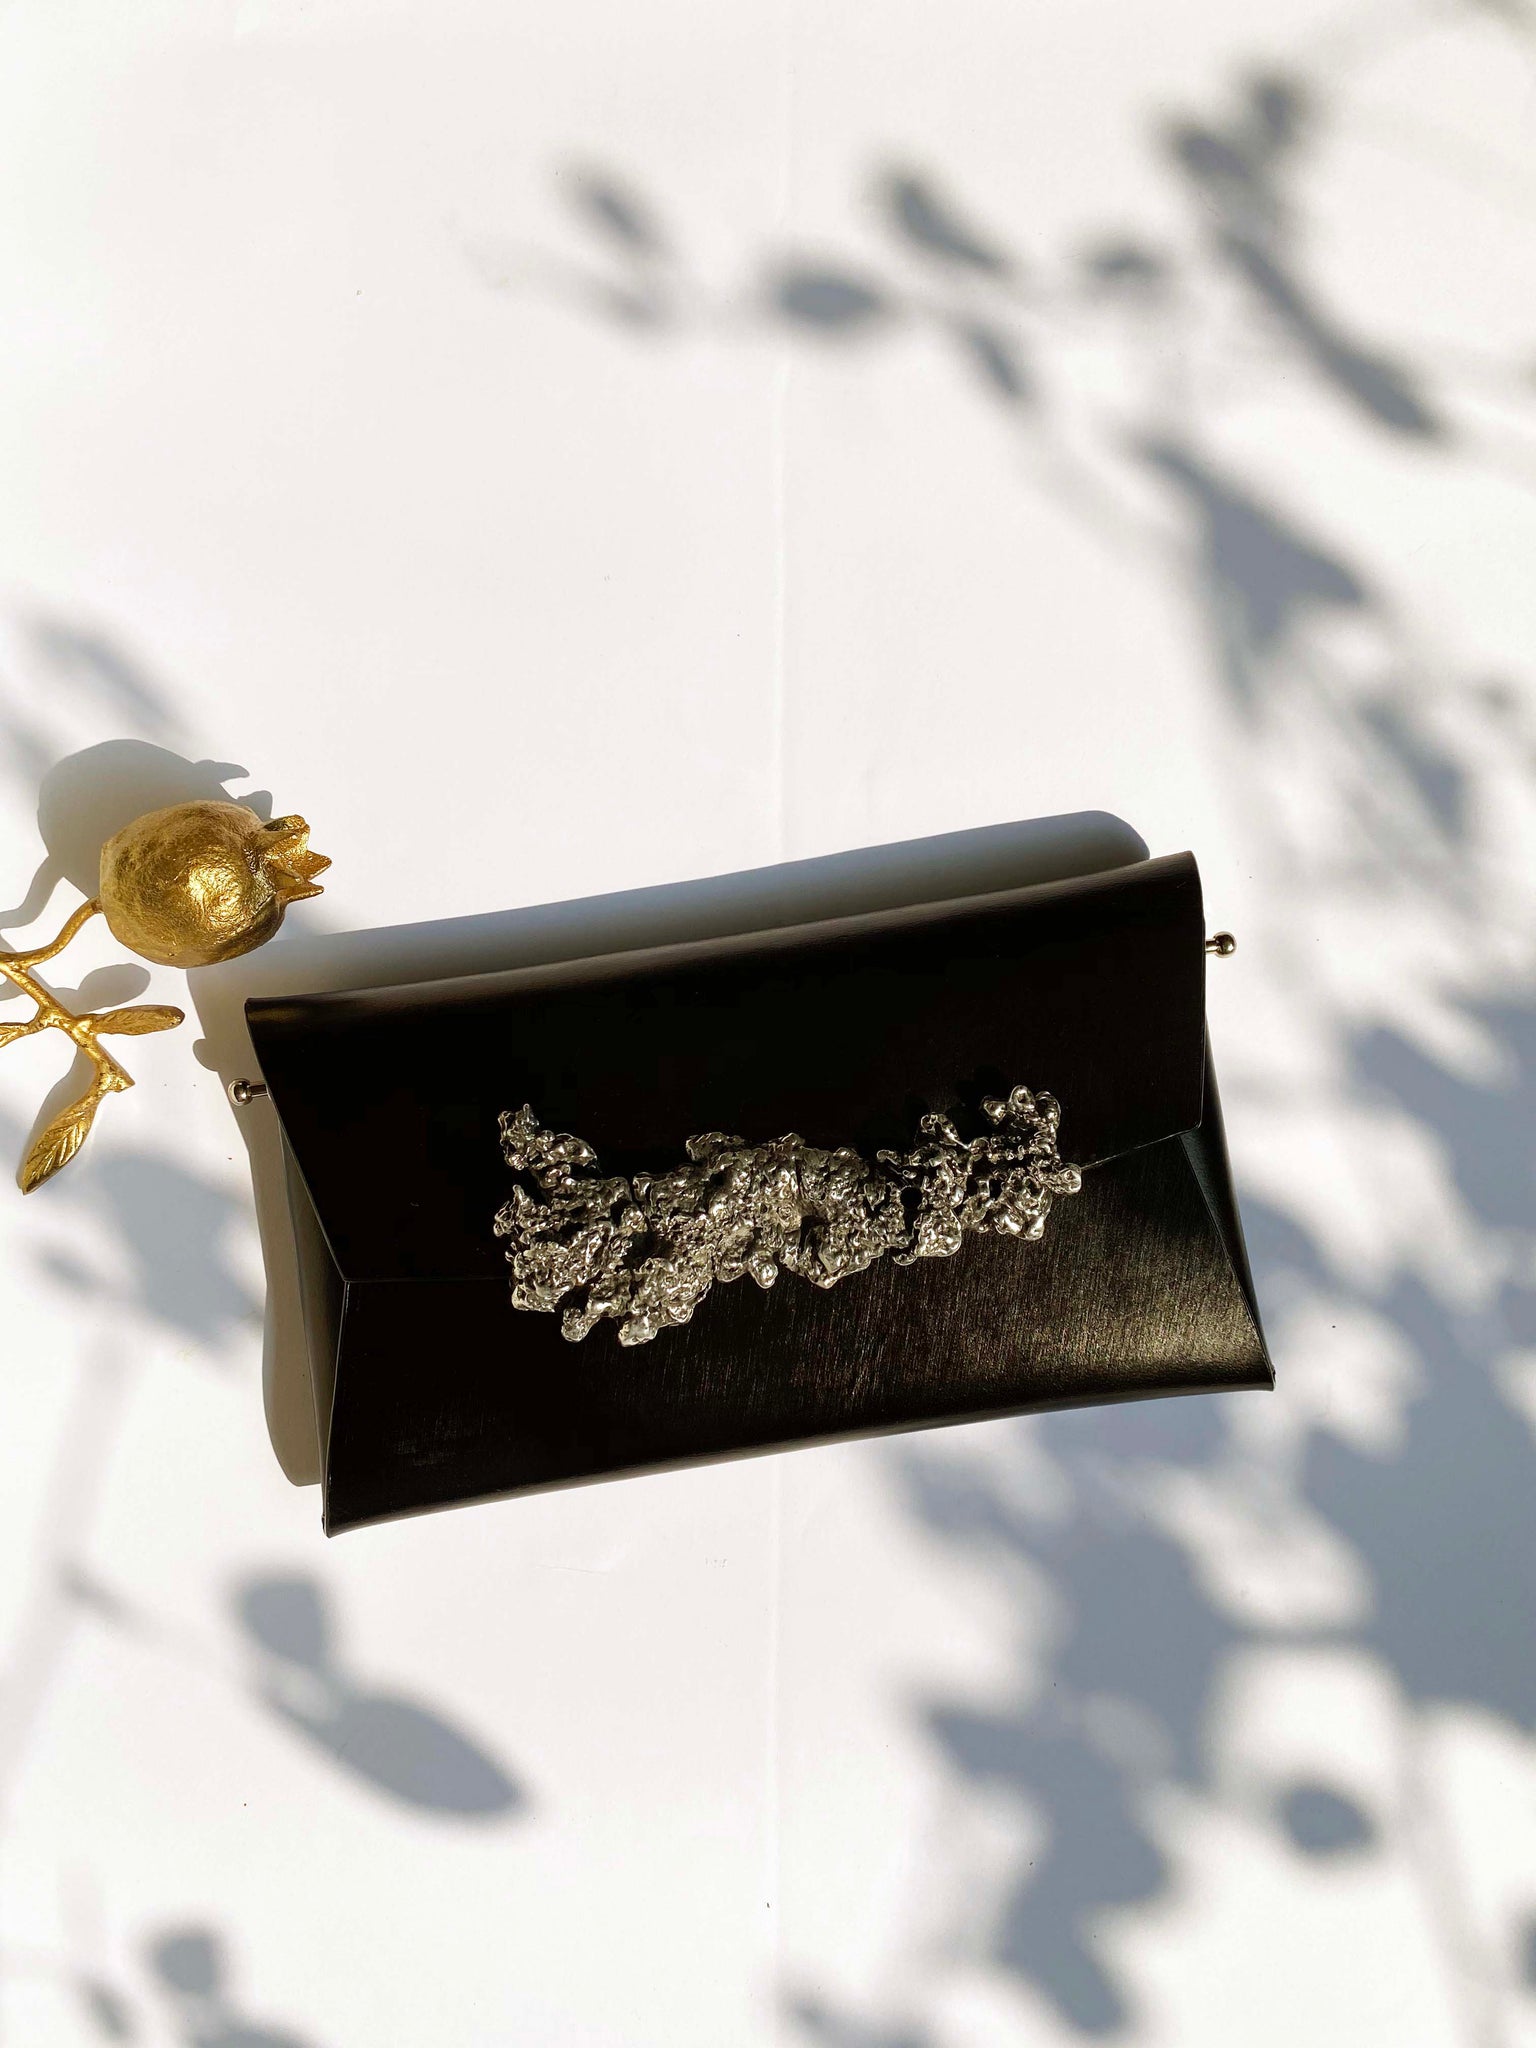 The Alum Stone Clutch - Limited Edition